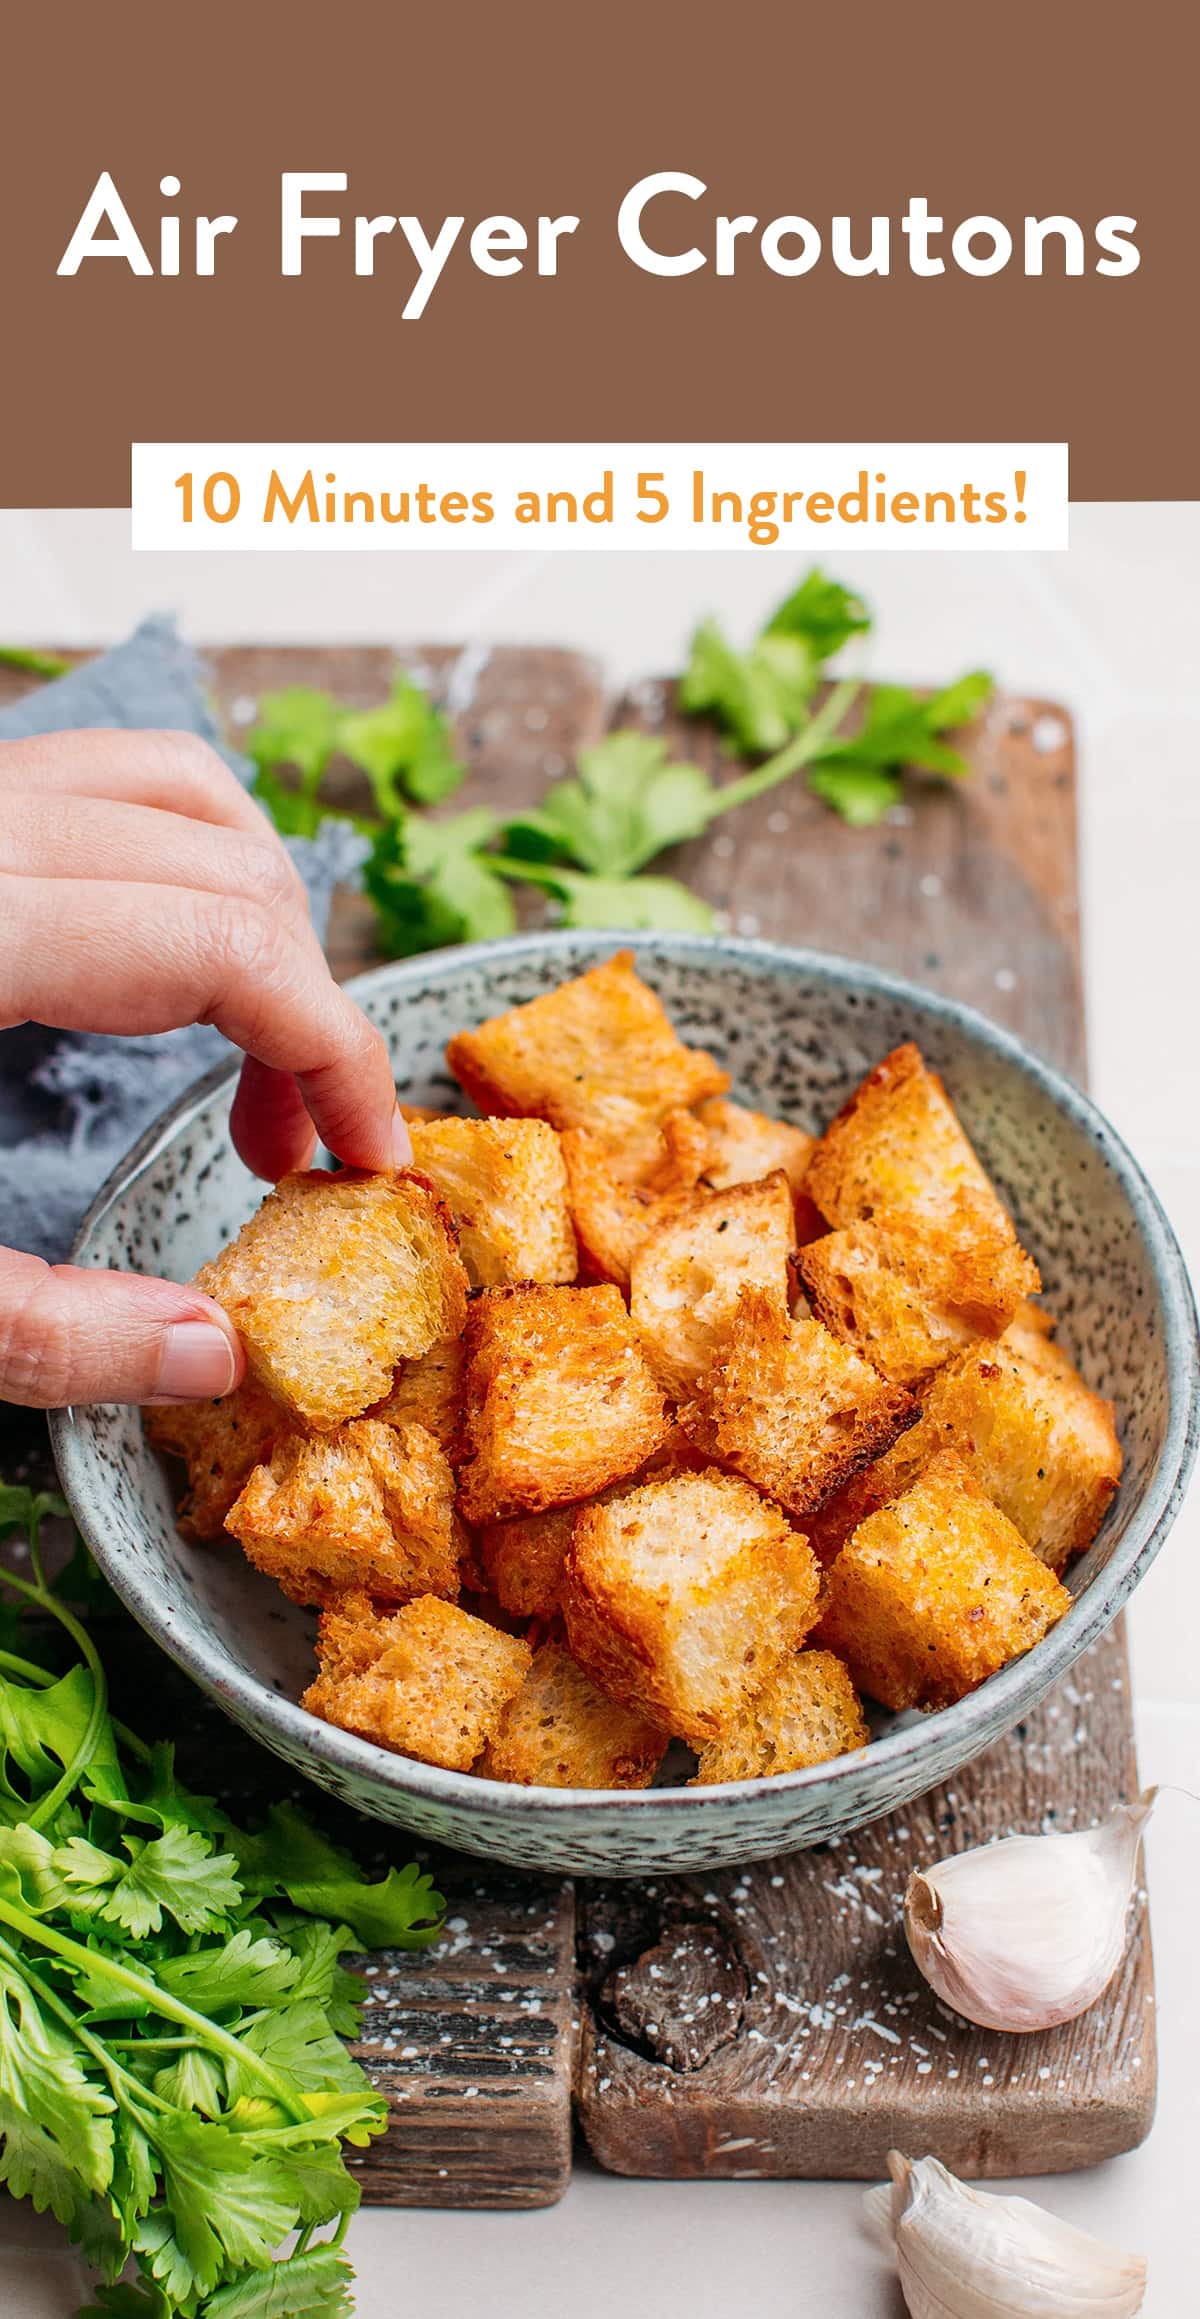 Super light and perfectly crispy, these air fryer garlic croutons are ready in just 10 minutes with 5 ingredients! What's not to love? Use them as a topping for warming soups, incorporate them in green salads, or enjoy them as a savory snack! #airfryer #croutons